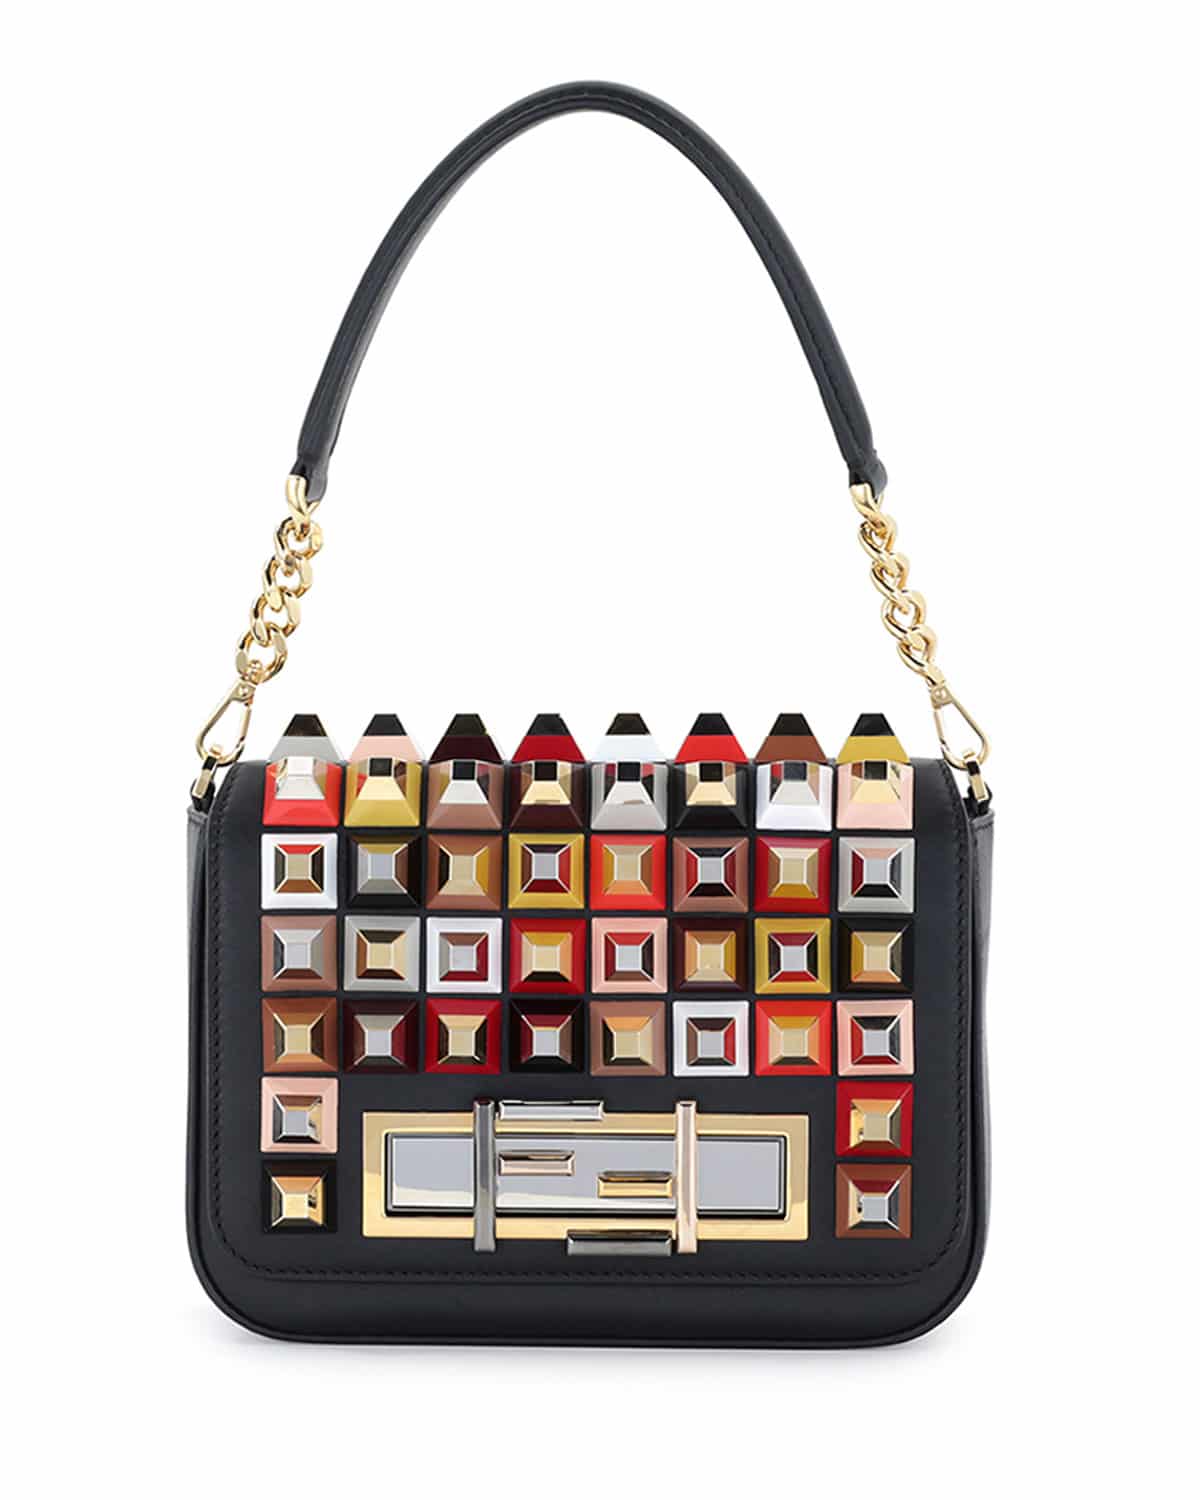 Fendi Fall/Winter 2015 Bag Collection Featuring the Peekaboo Clutch Bag Spotted